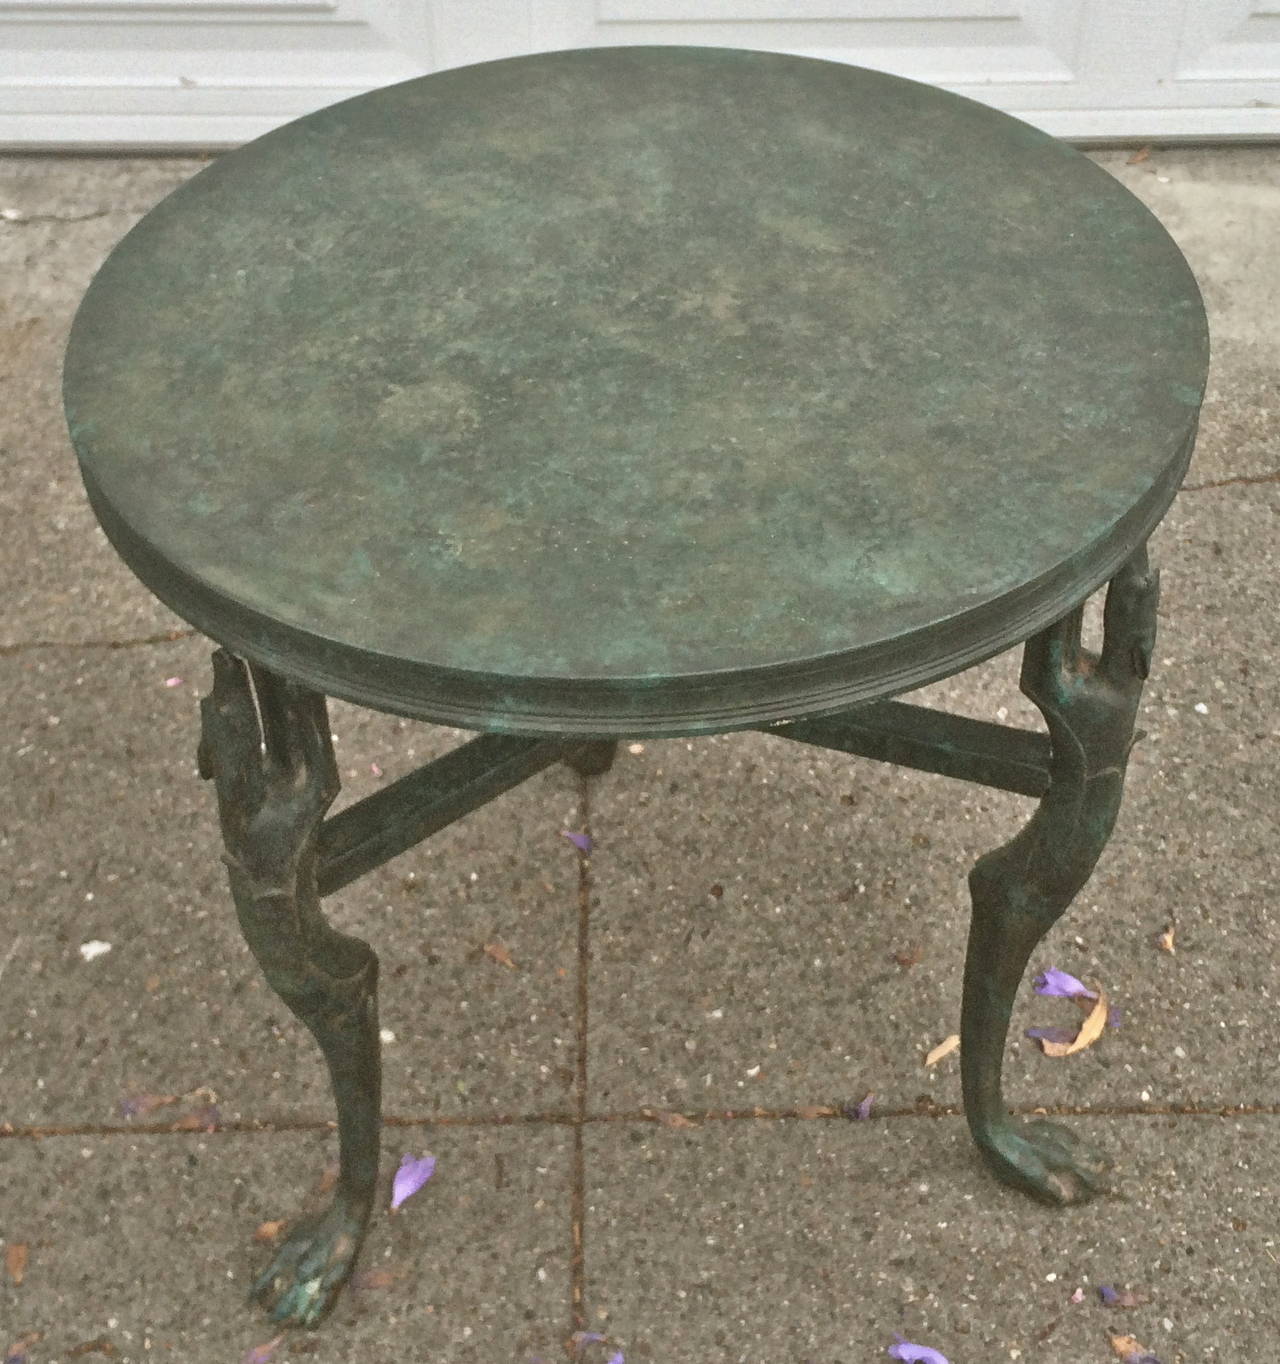 Art Deco Table With Greyhound Legs
Circa 1930
Welded Bronze
Deep Green patina, excellent condition